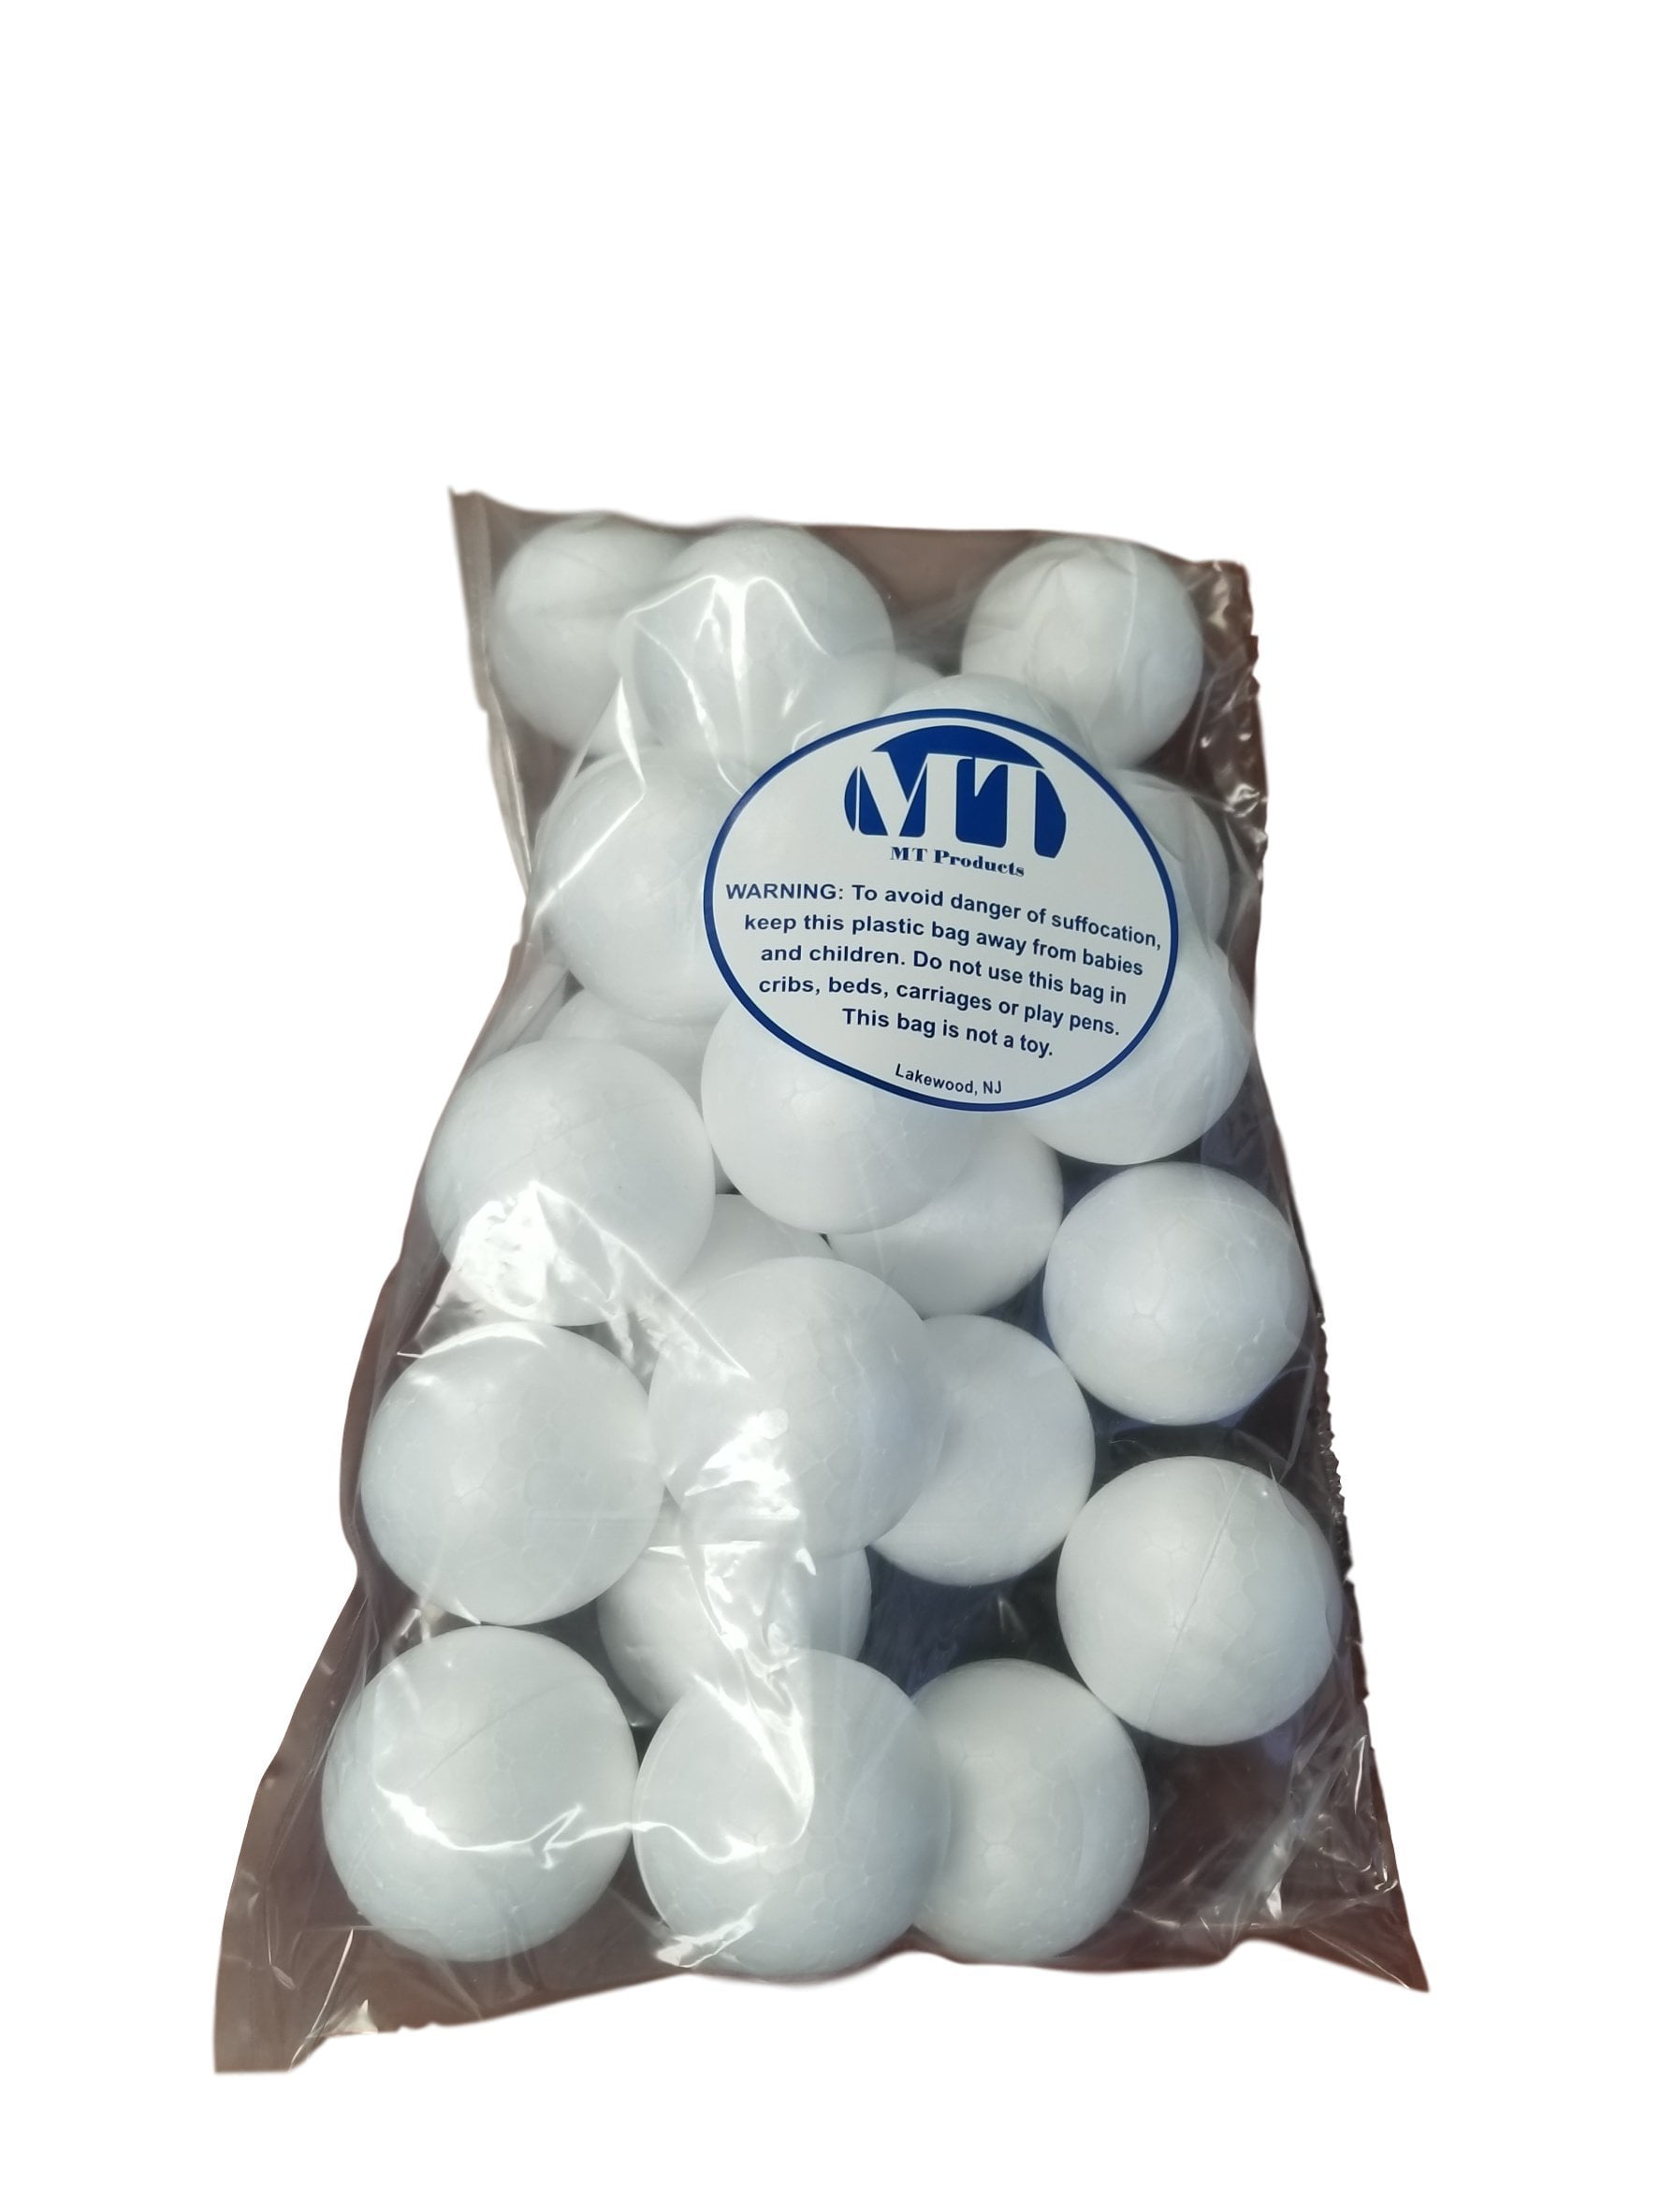 MT Products 8 White Polystyrene Foam Balls for Crafts - Pack of 2